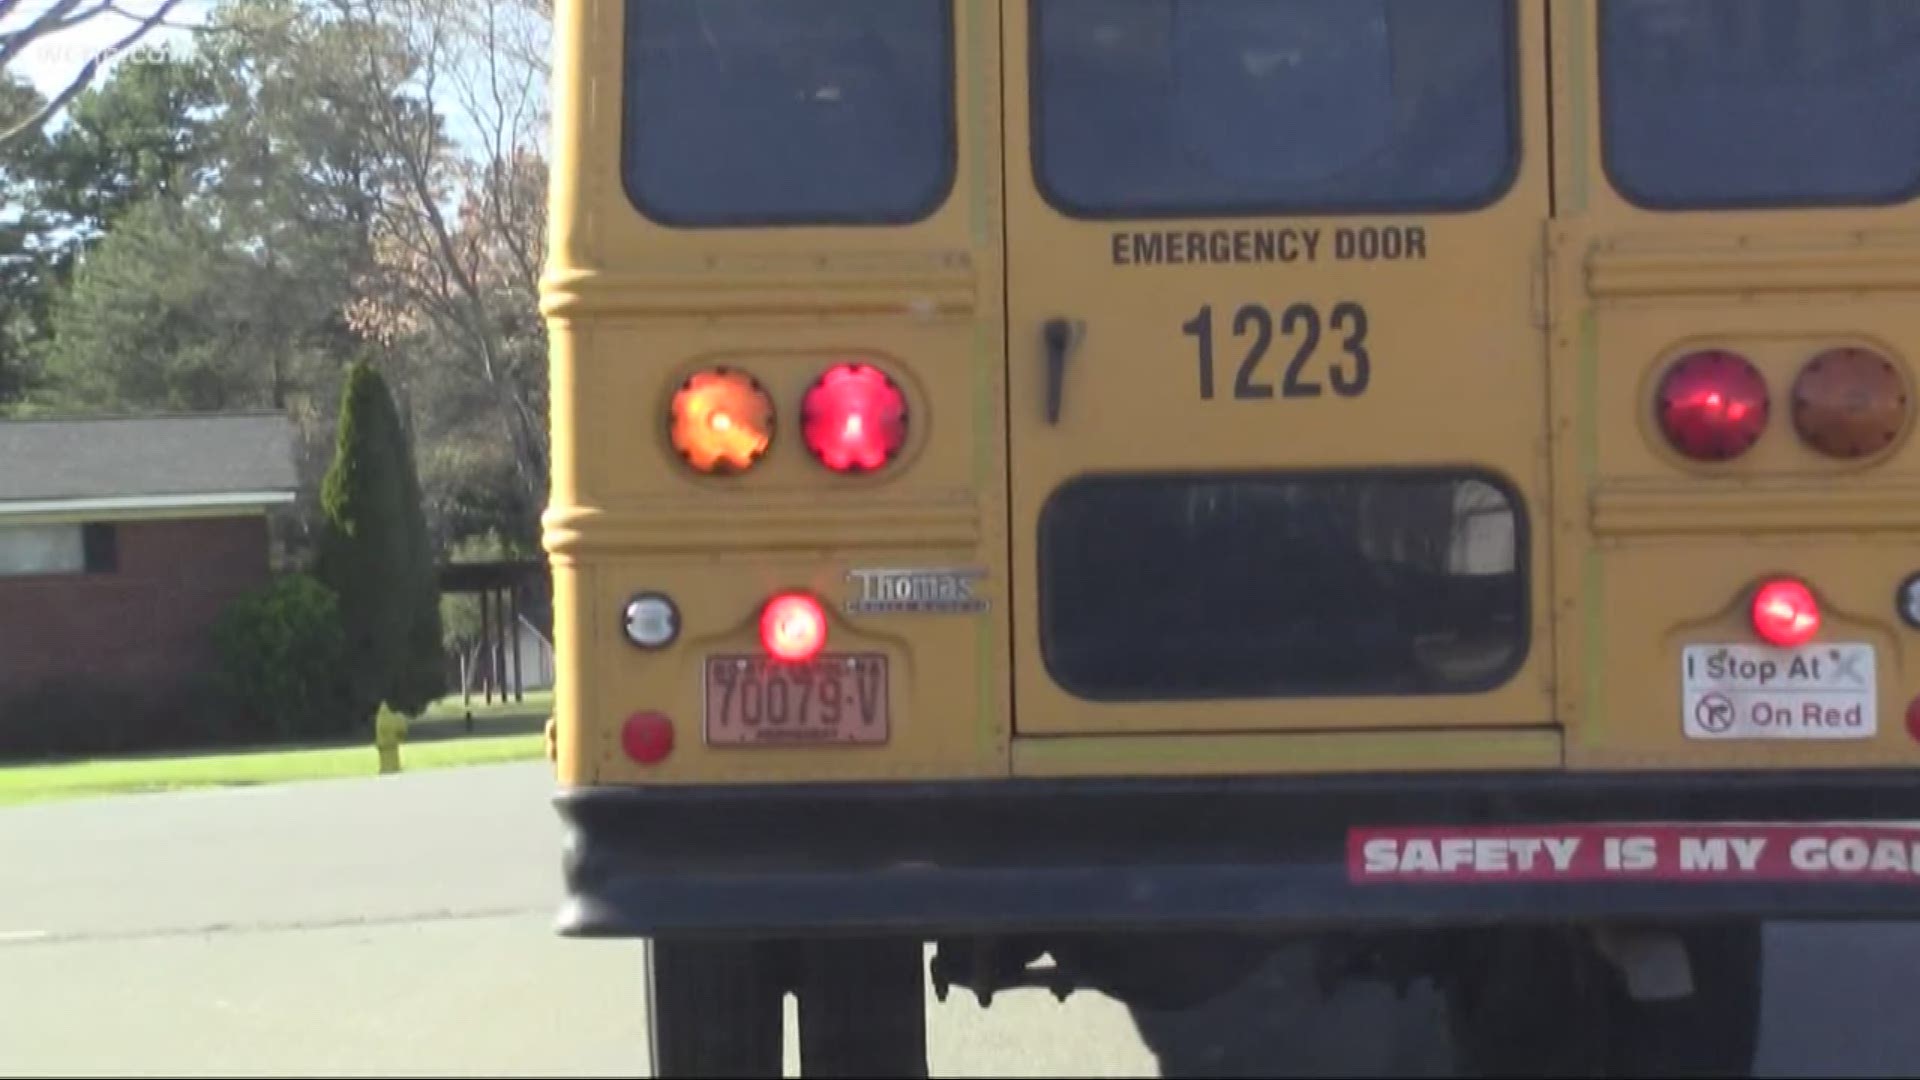 Just two weeks into the school year, Charlotte-Mecklenburg Schools has already received more than 400 complaints about the safety of bus stops, according to the school district.